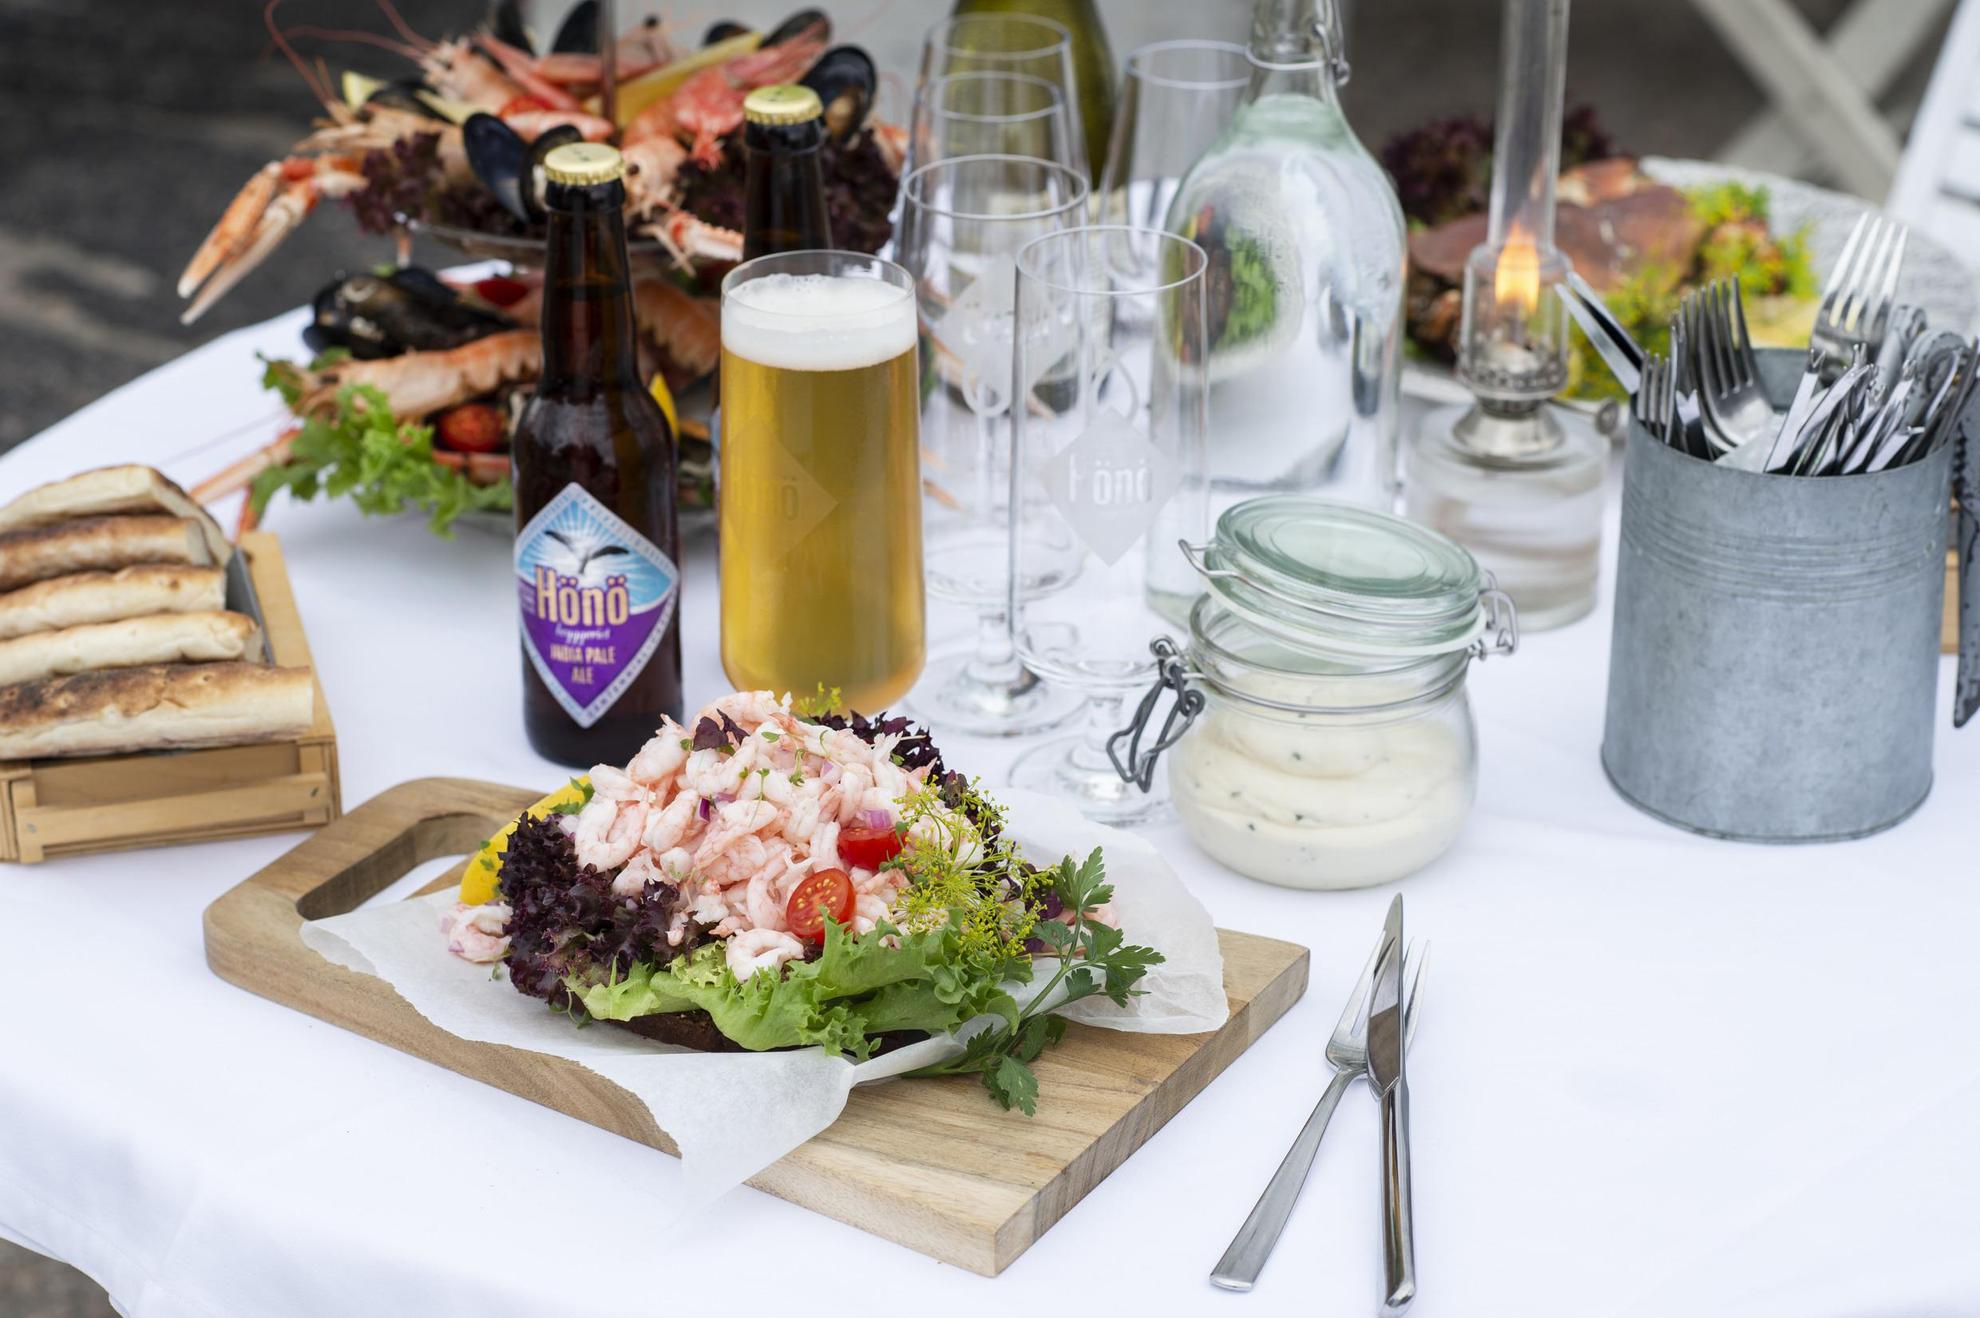 A set table with a seafood sandwich, seafood platters and beer from Hönö brewery.